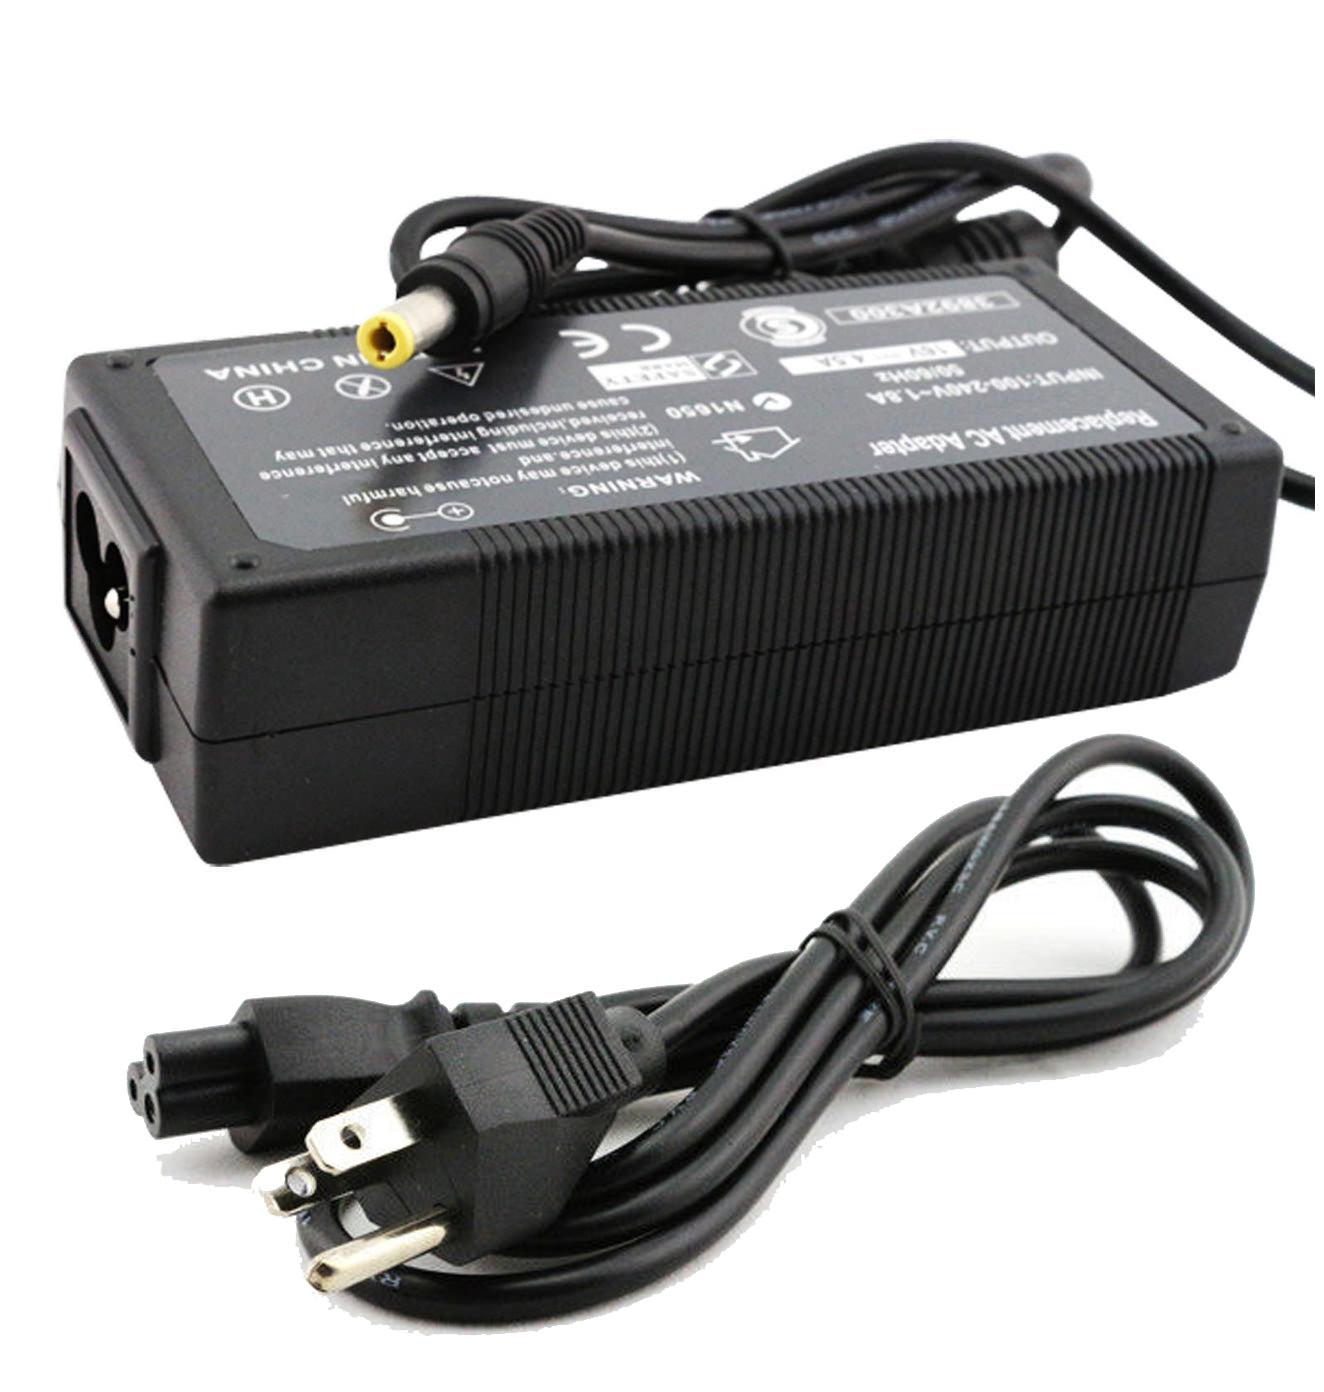 AC Adapter Charger for Panasonic Toughbook CF-R3 Notebook.